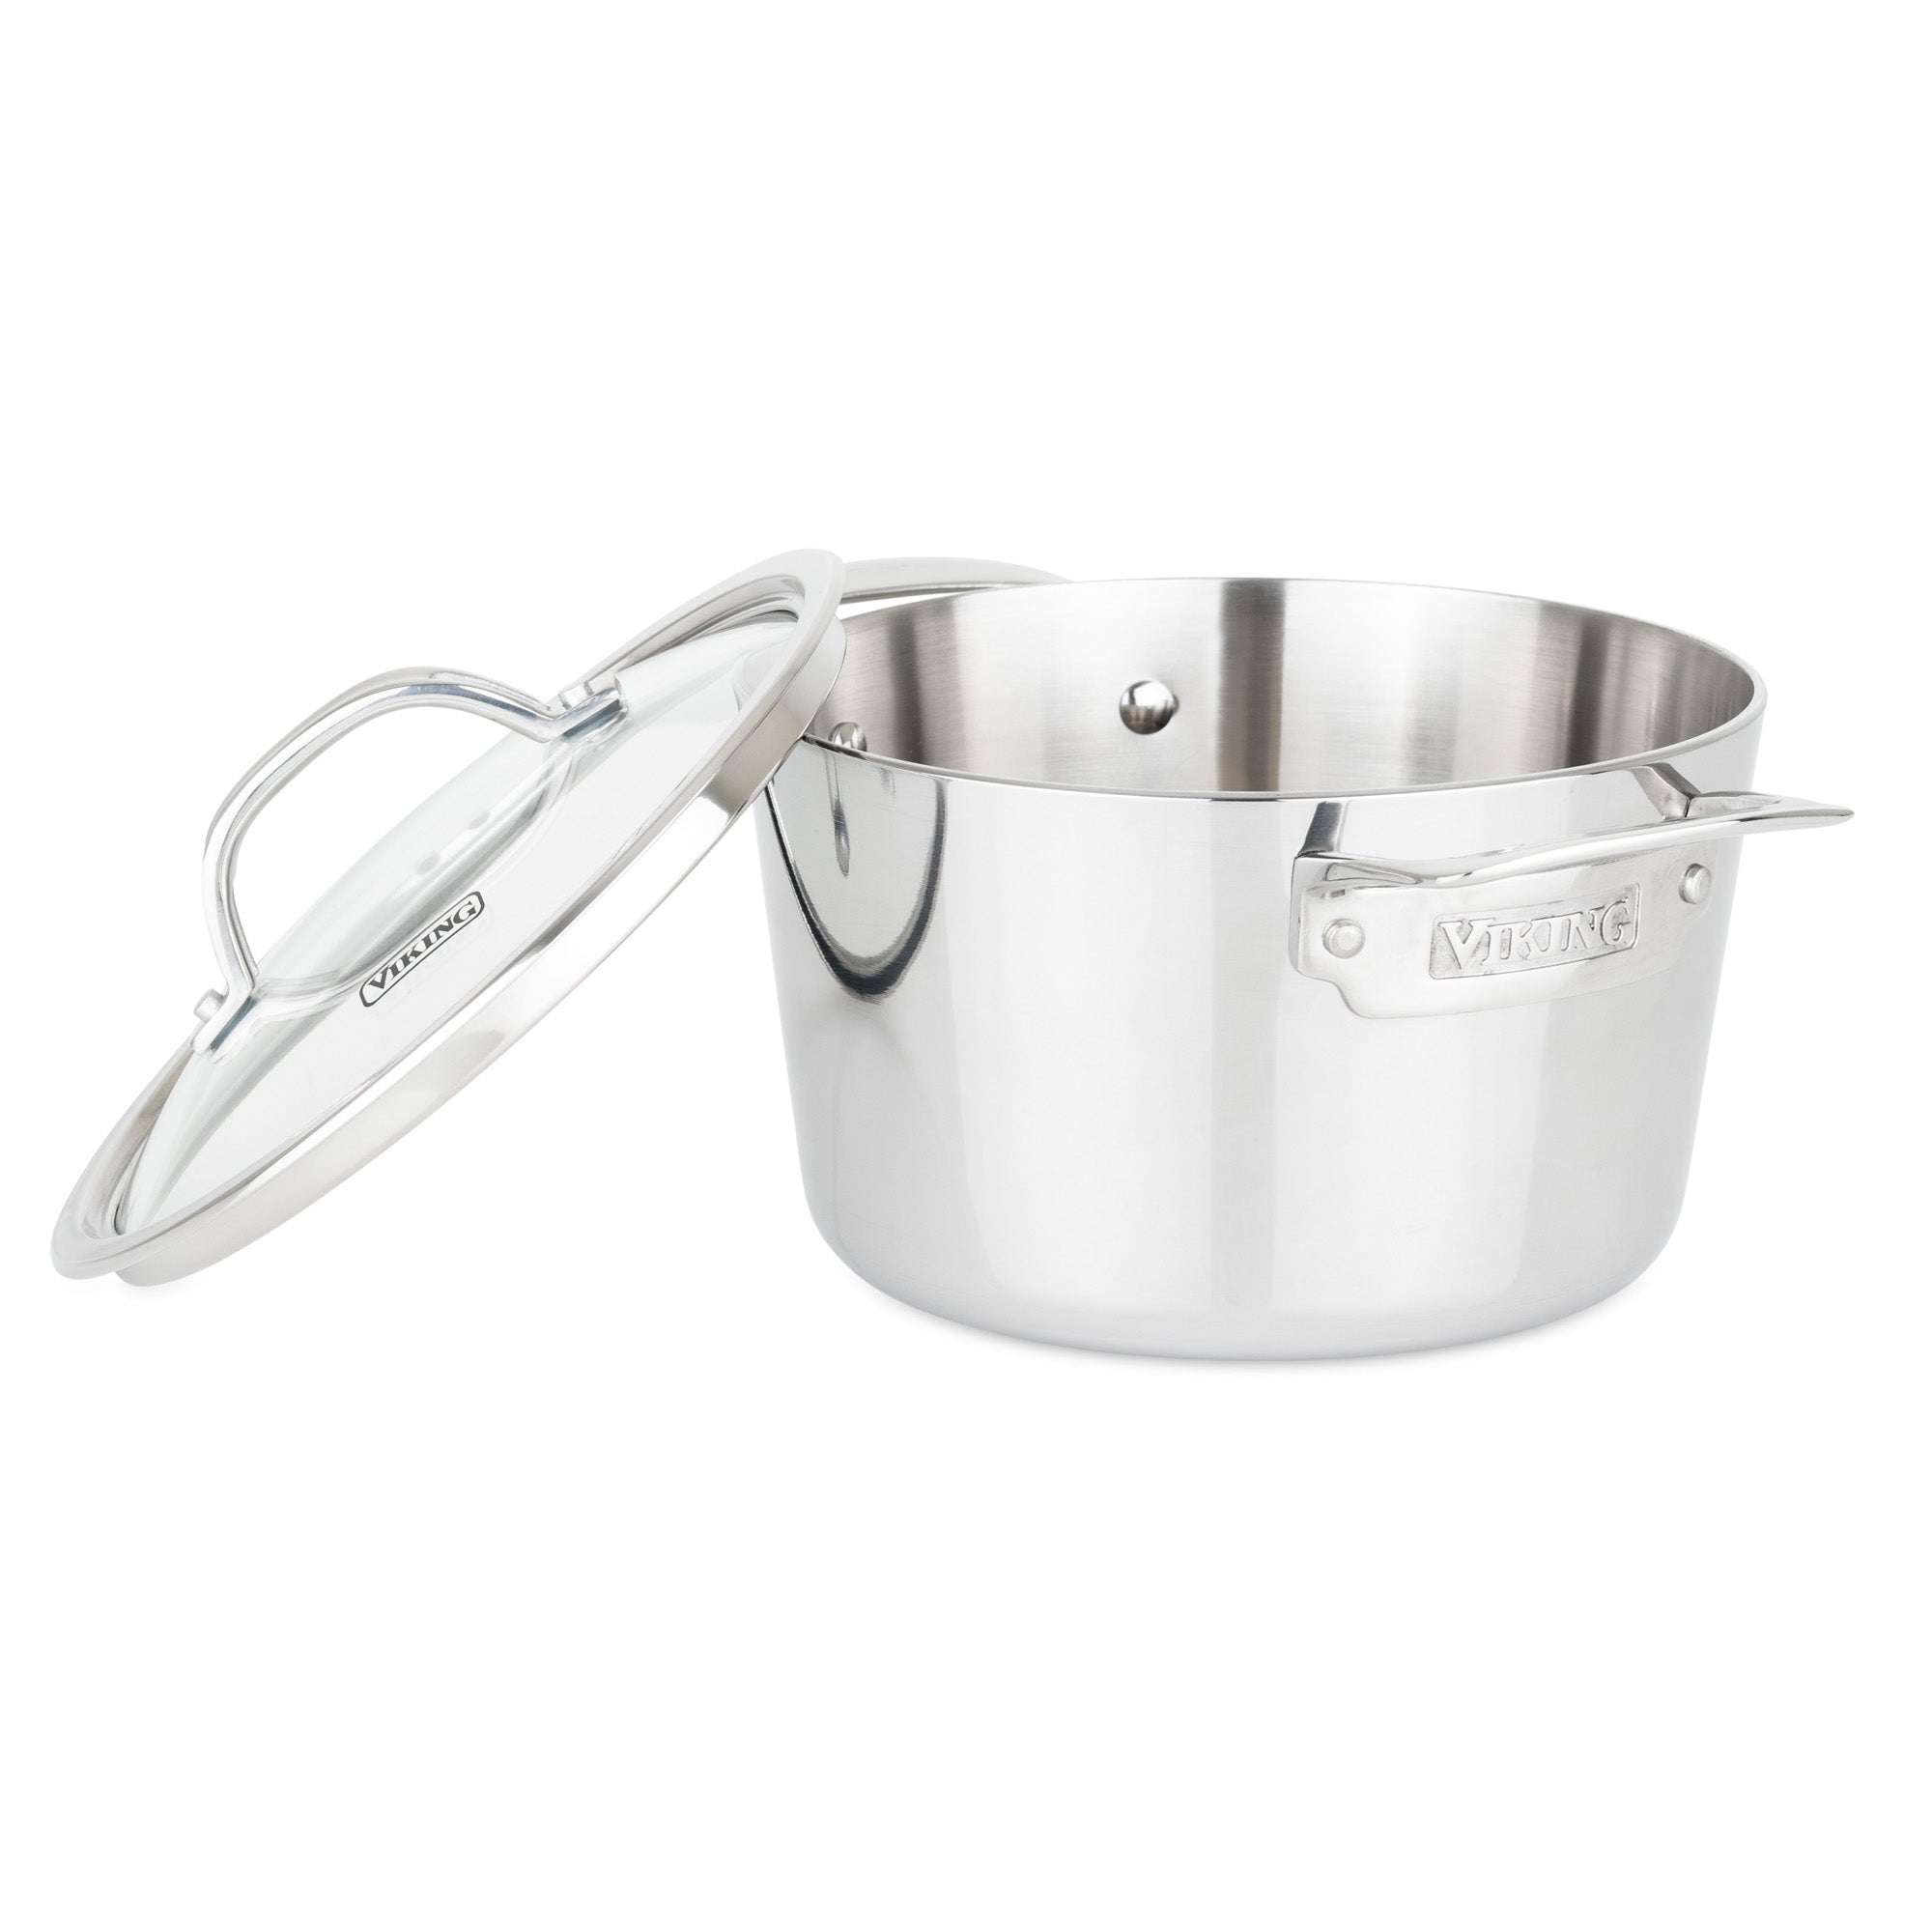 Viking Contemporary 3-Ply Stainless Steel 3.4-Quart Soup Pot